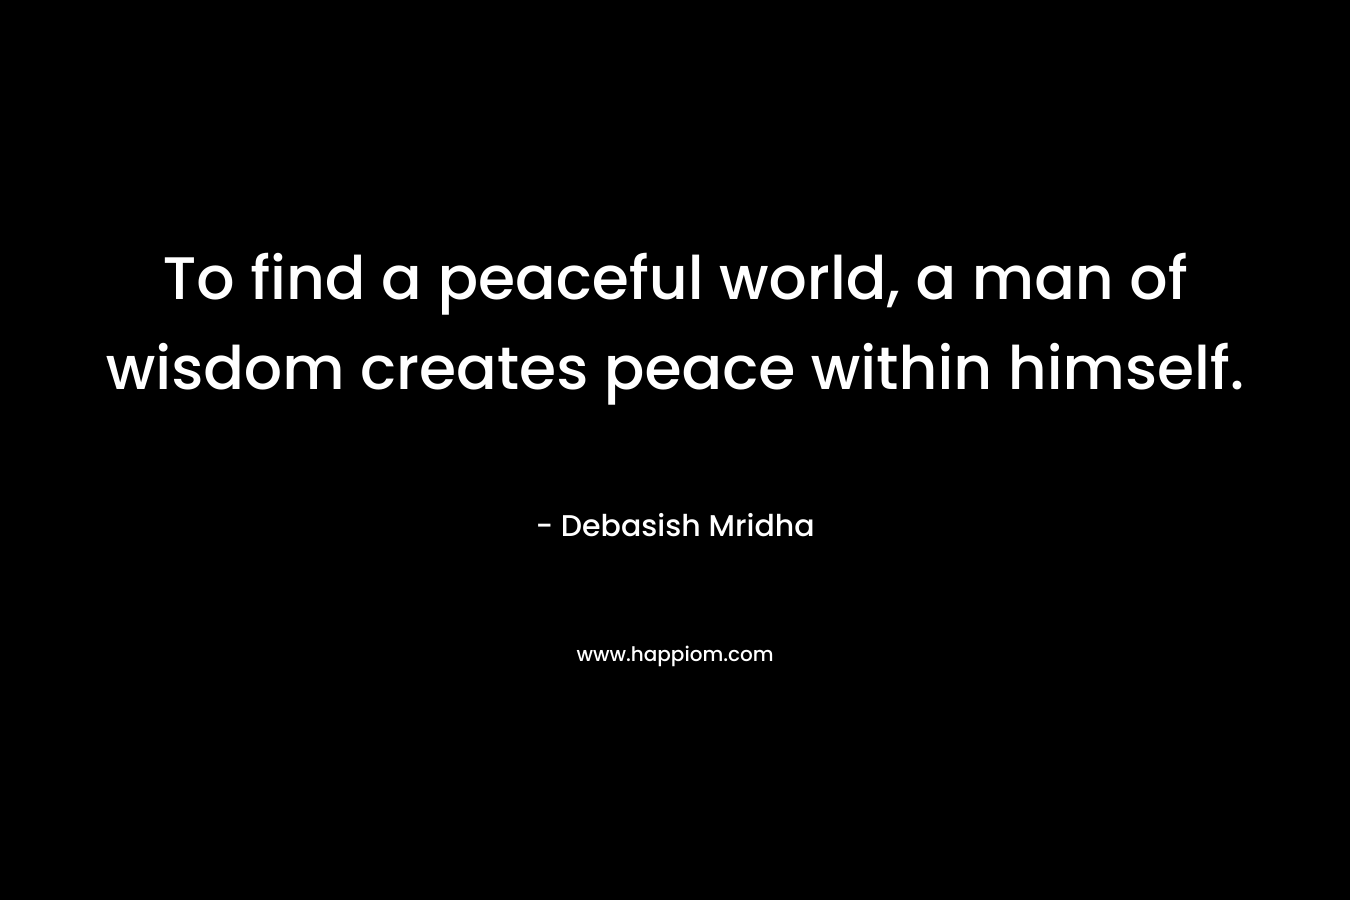 To find a peaceful world, a man of wisdom creates peace within himself.